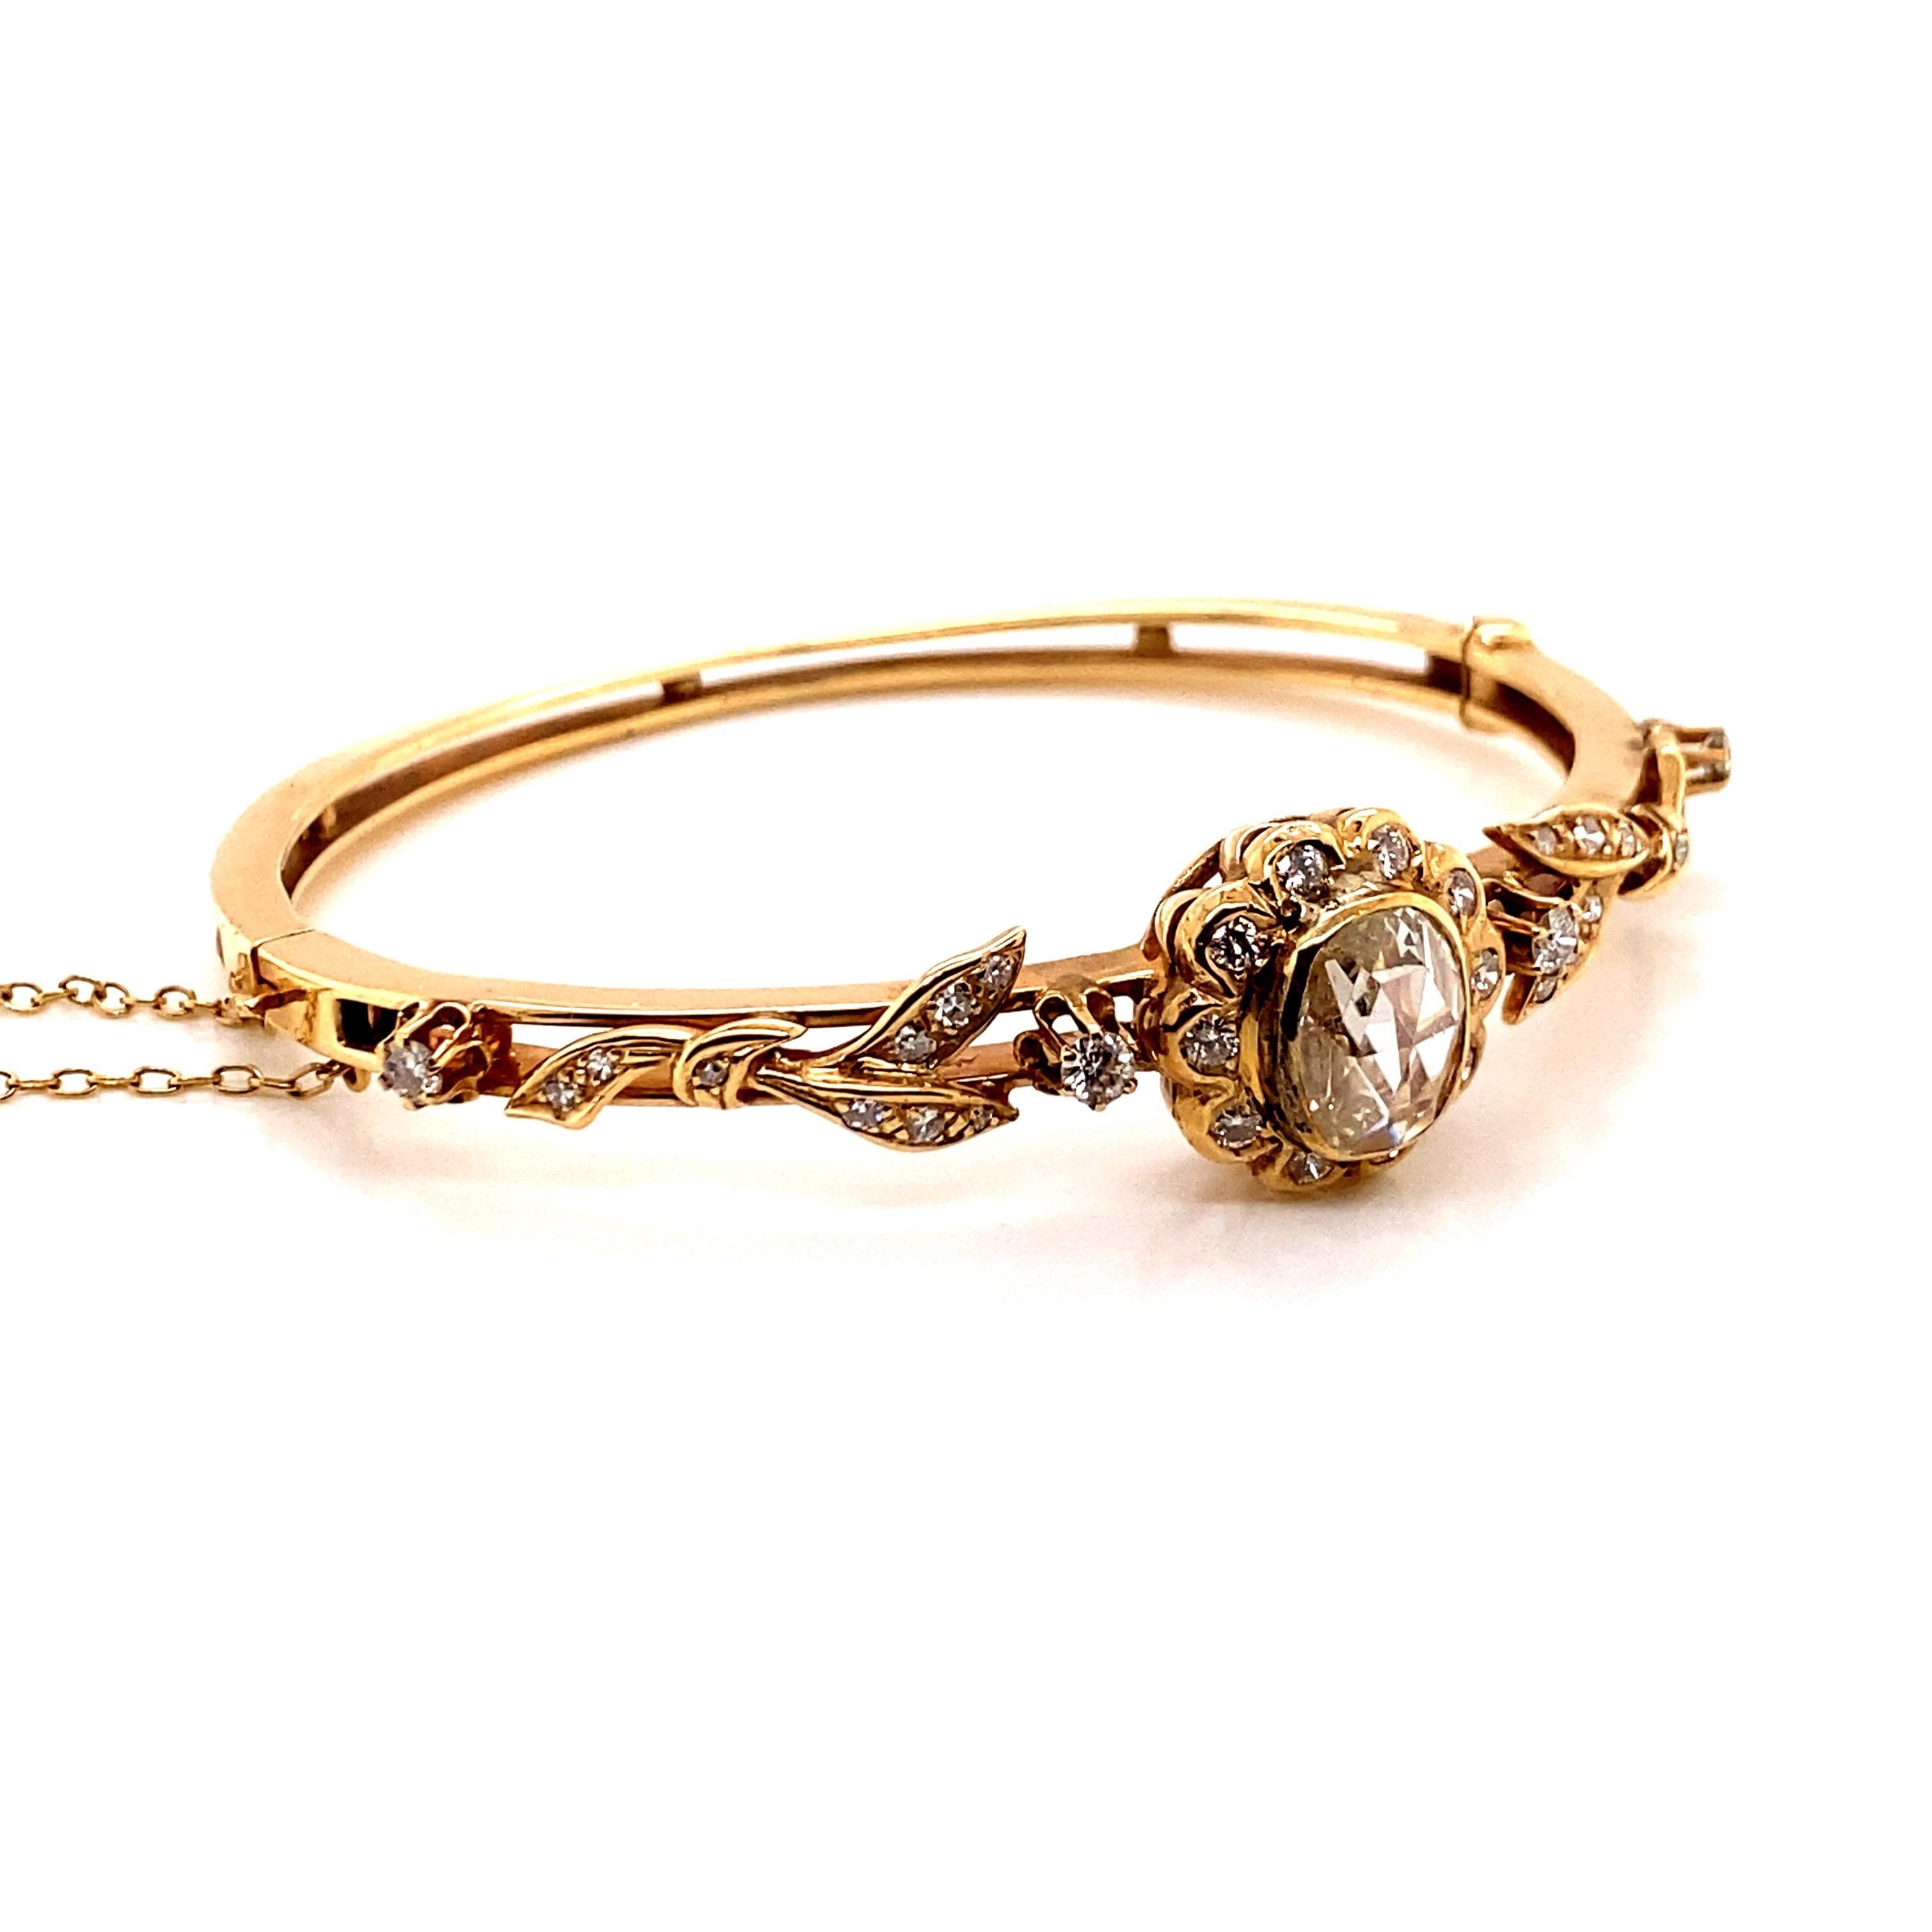 Vintage 14k Yellow Gold Victorian Reproduction Rose Cut Diamond Bangle Bracelet In Good Condition For Sale In Boston, MA